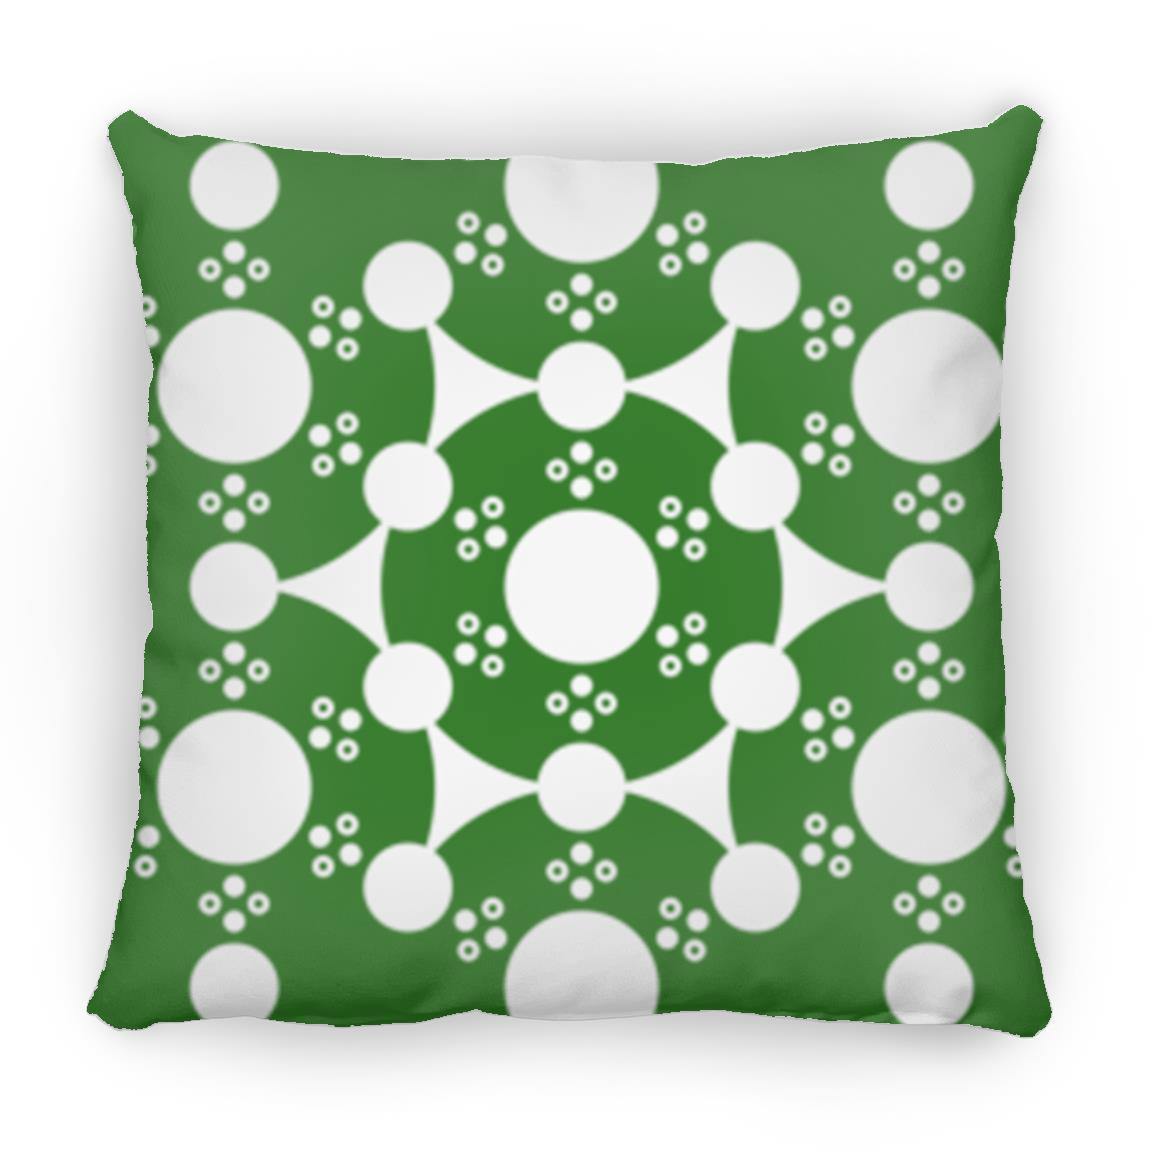 Crop Circle Pillow - Mere - Shapes of Wisdom